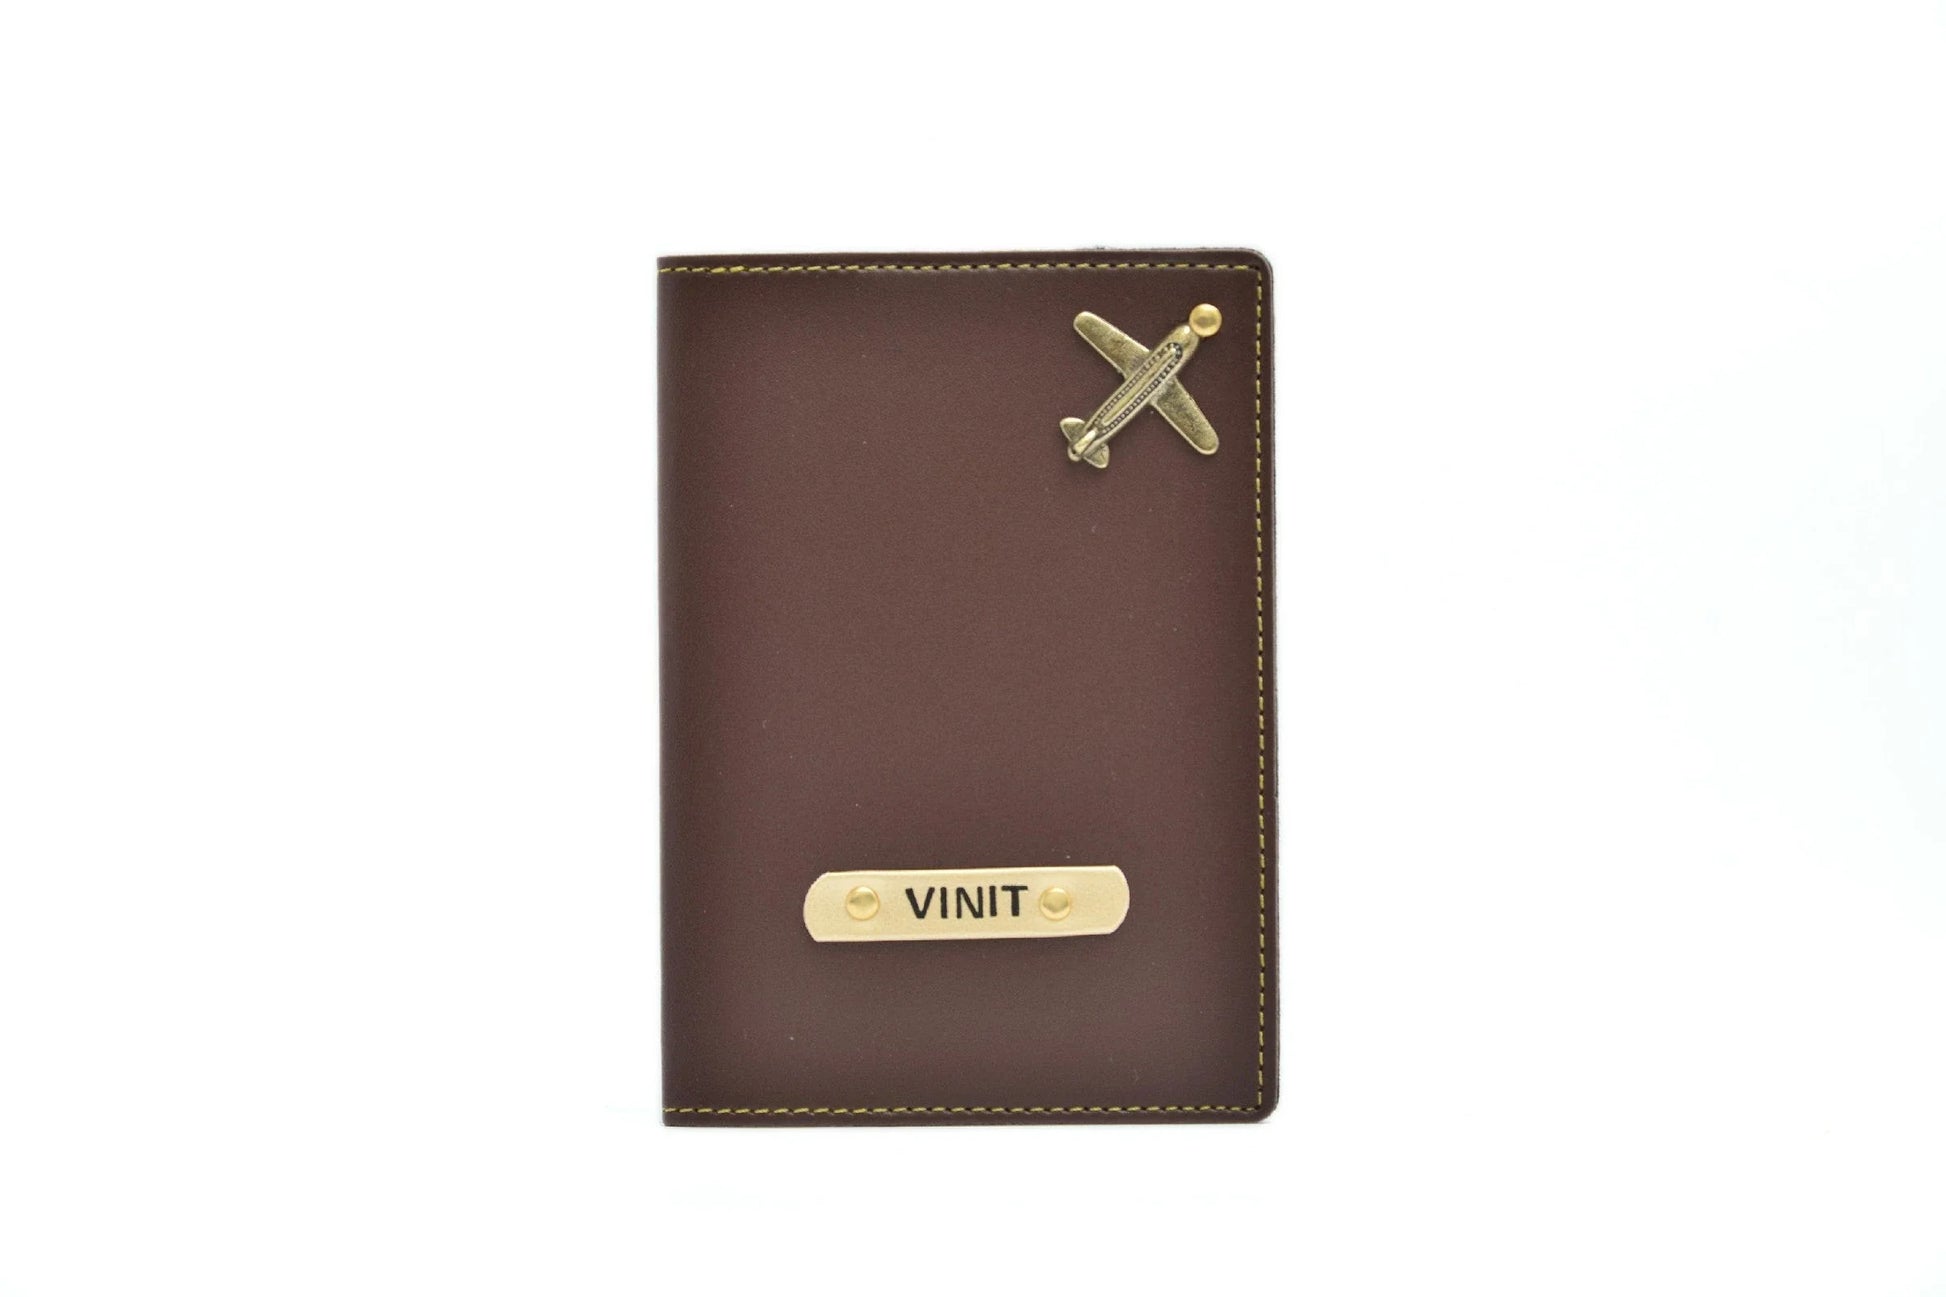 Get your name and favourite charm added to your favourite Premium Quality customized Faux Leather unisex Passport Cover!